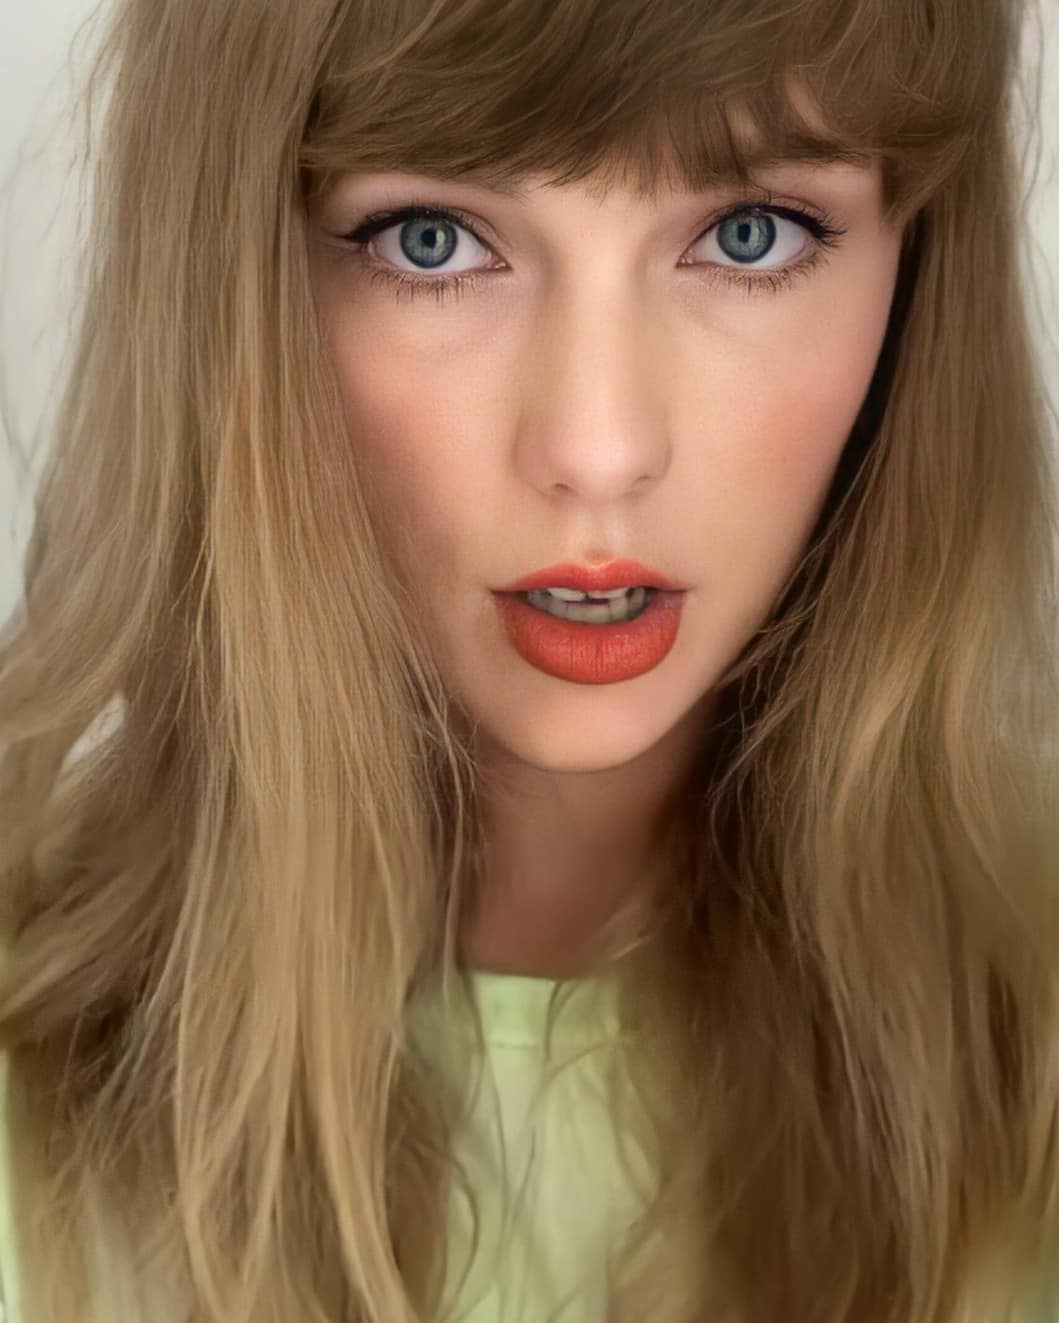 Taylors Lips Are Perfect For Blowjob Scrolller 